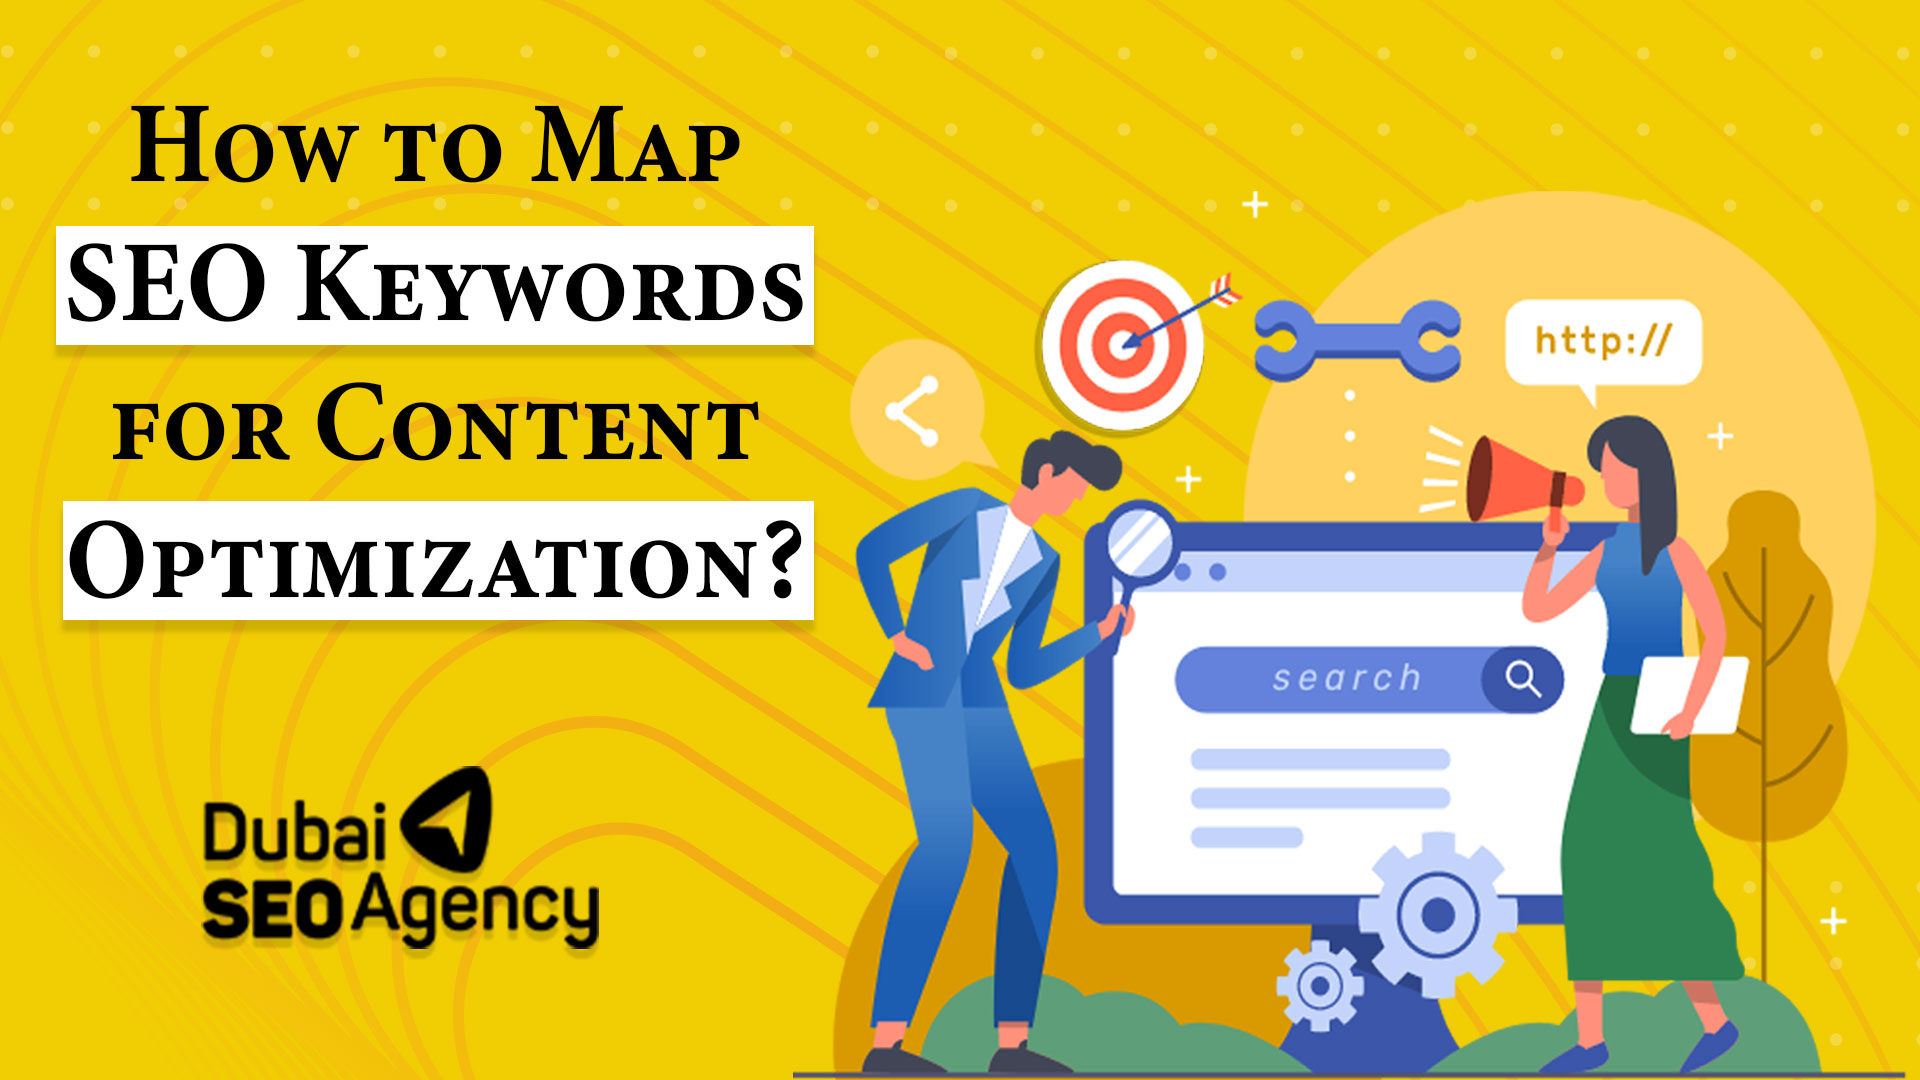 How to map seo keywords for content optimization in 5 easy steps?